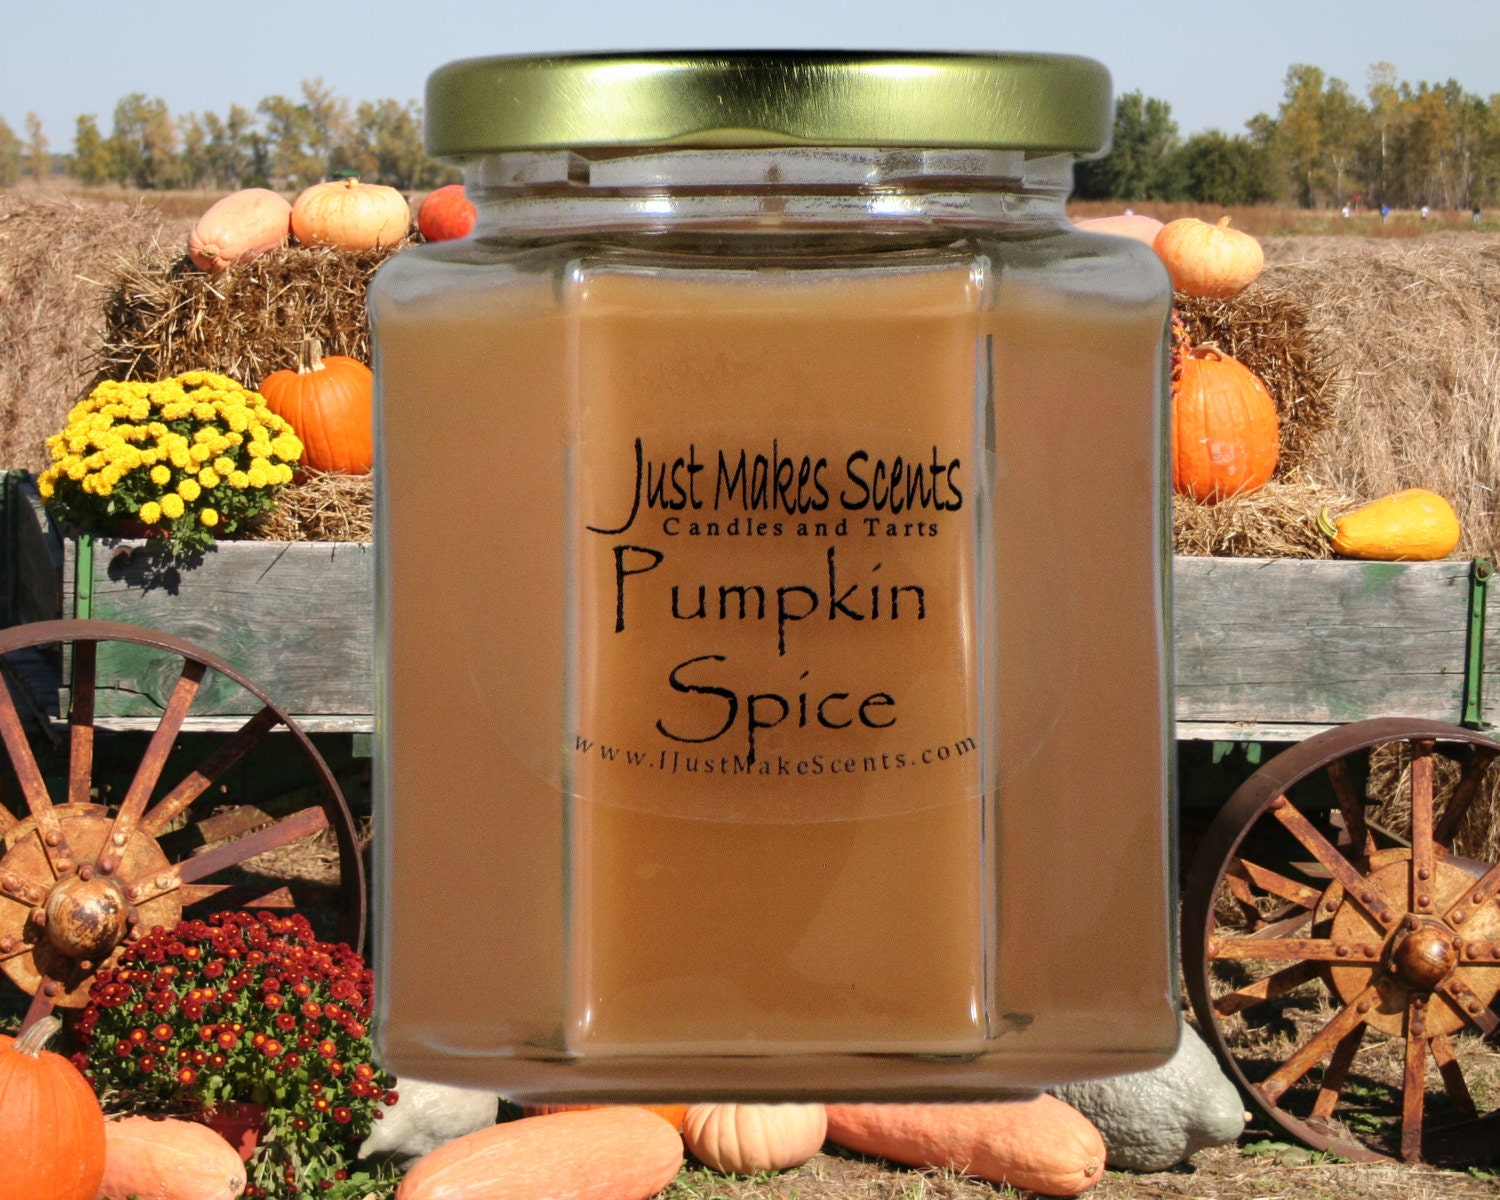 Pumpkin Spice Soy Candle - Blended Autumn Scent Candles